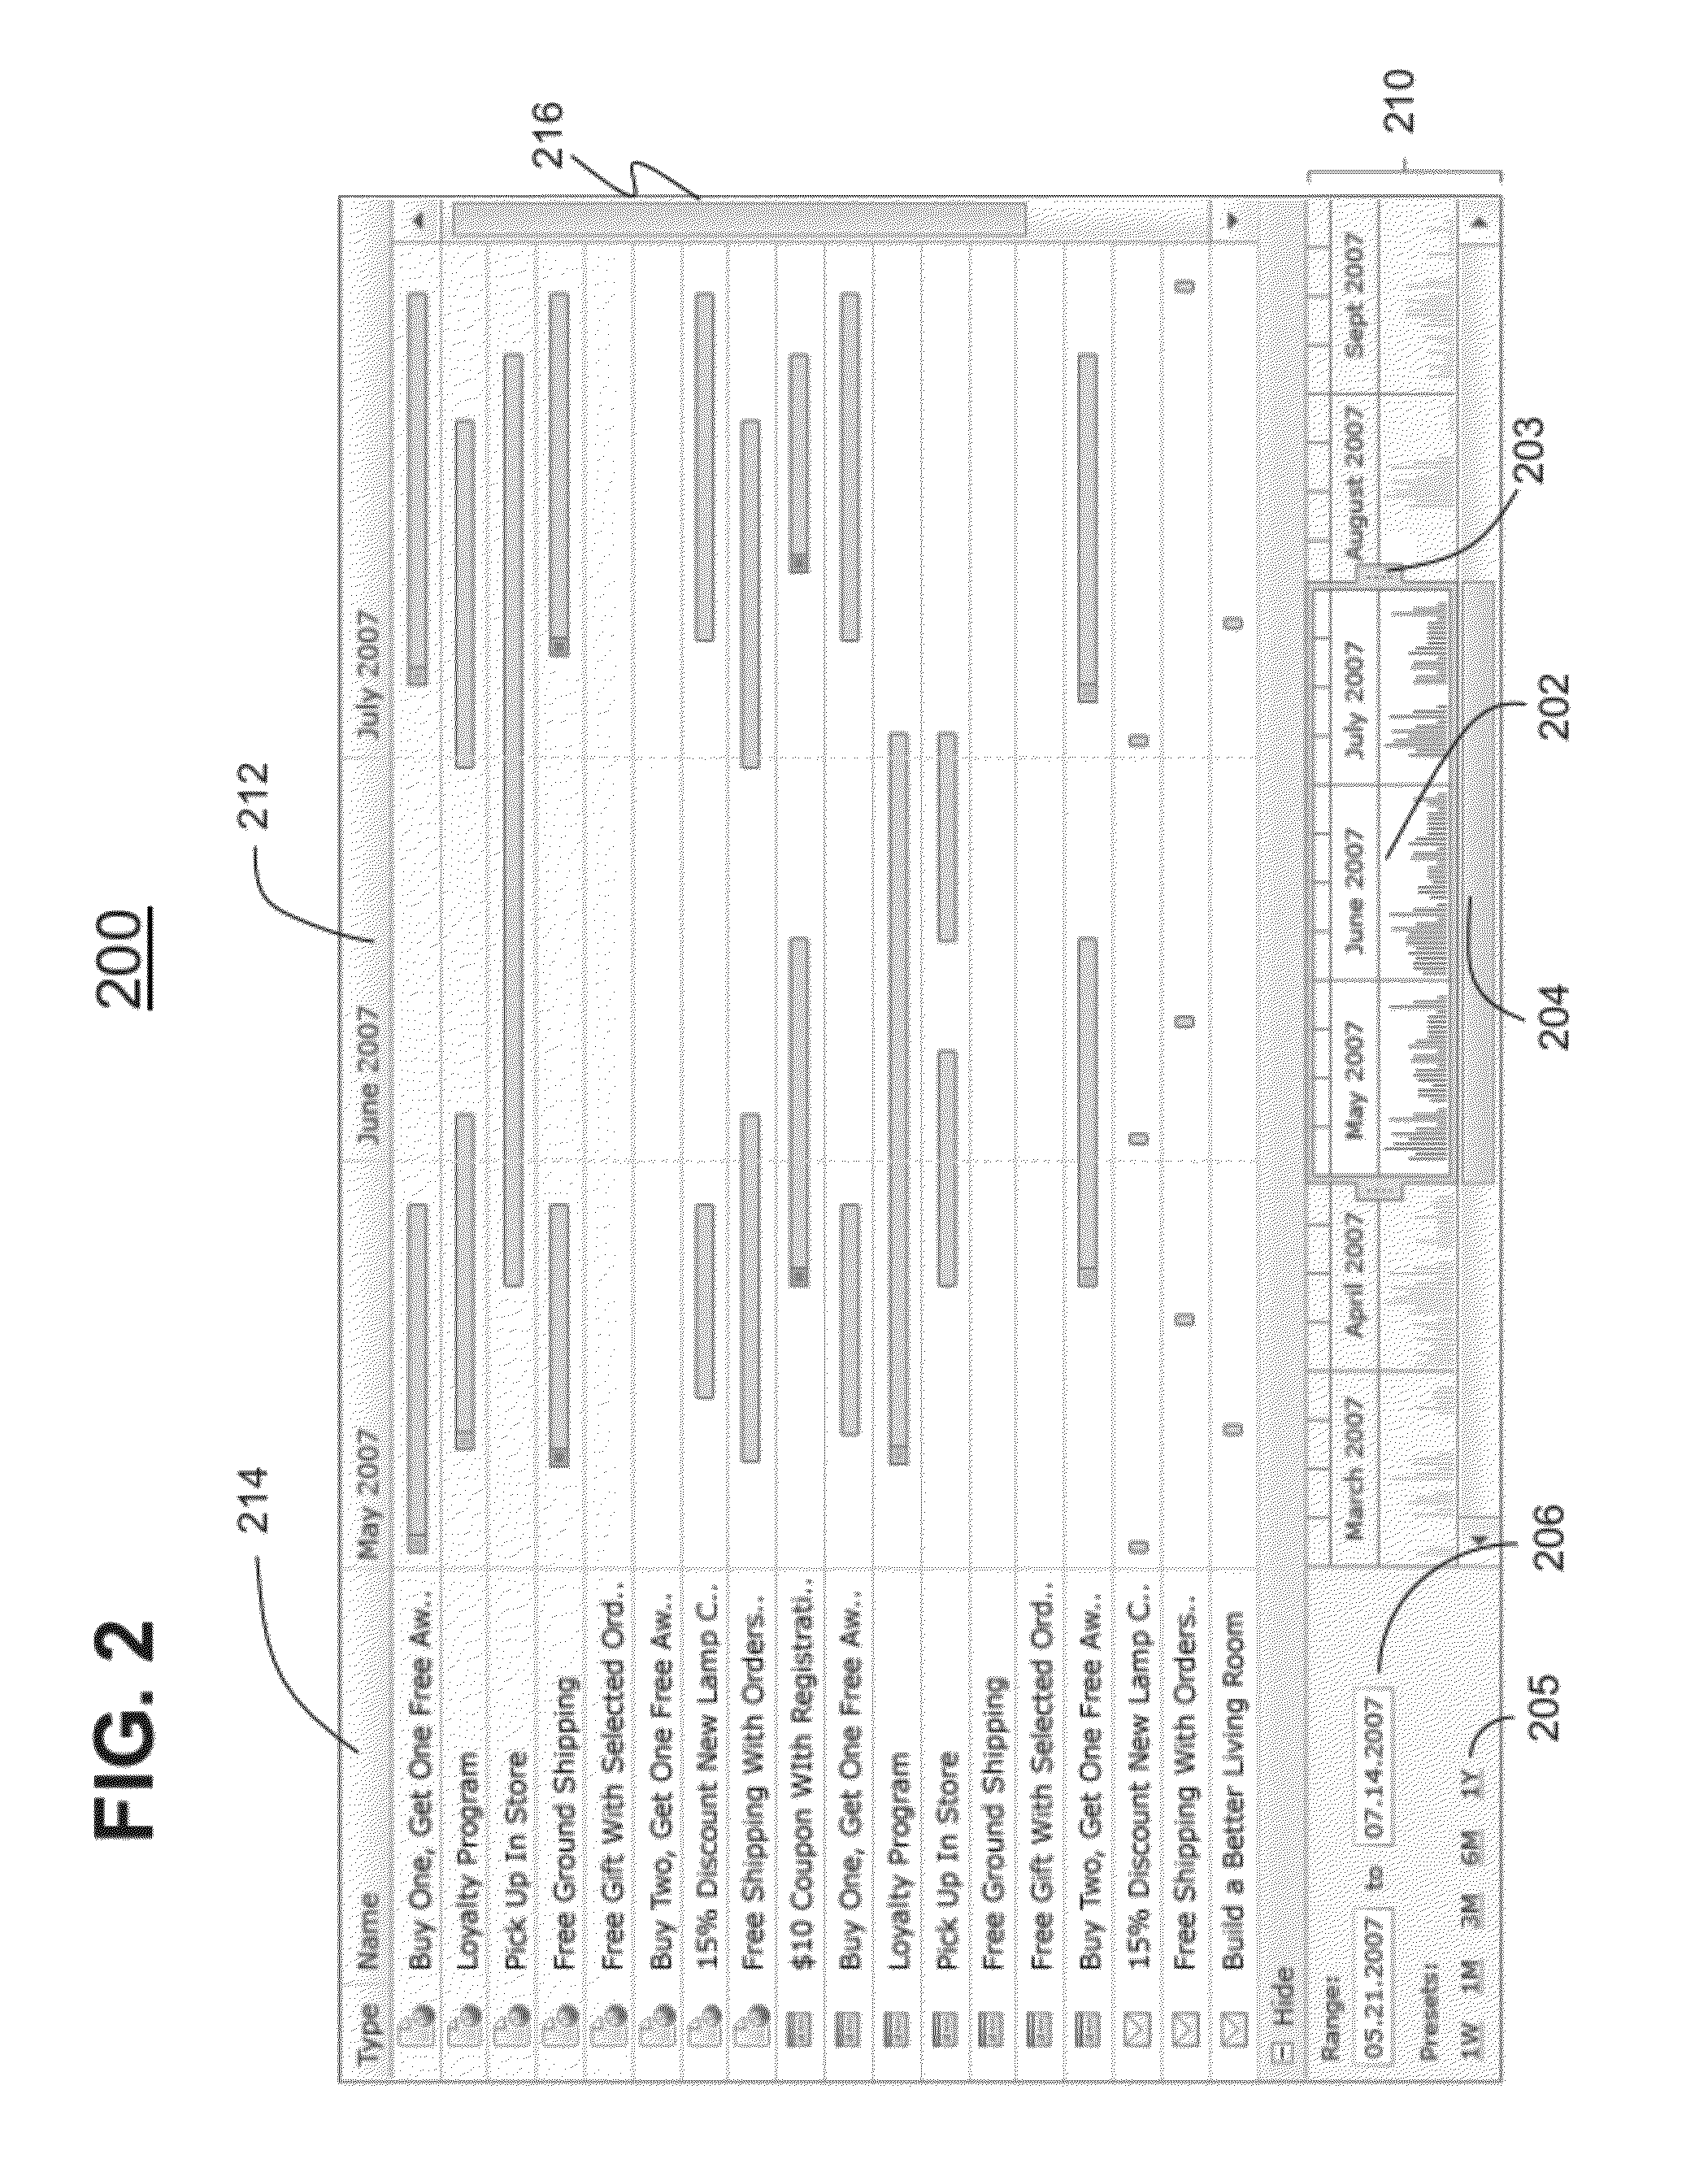 System and method for displaying gantt charts with other project management tools